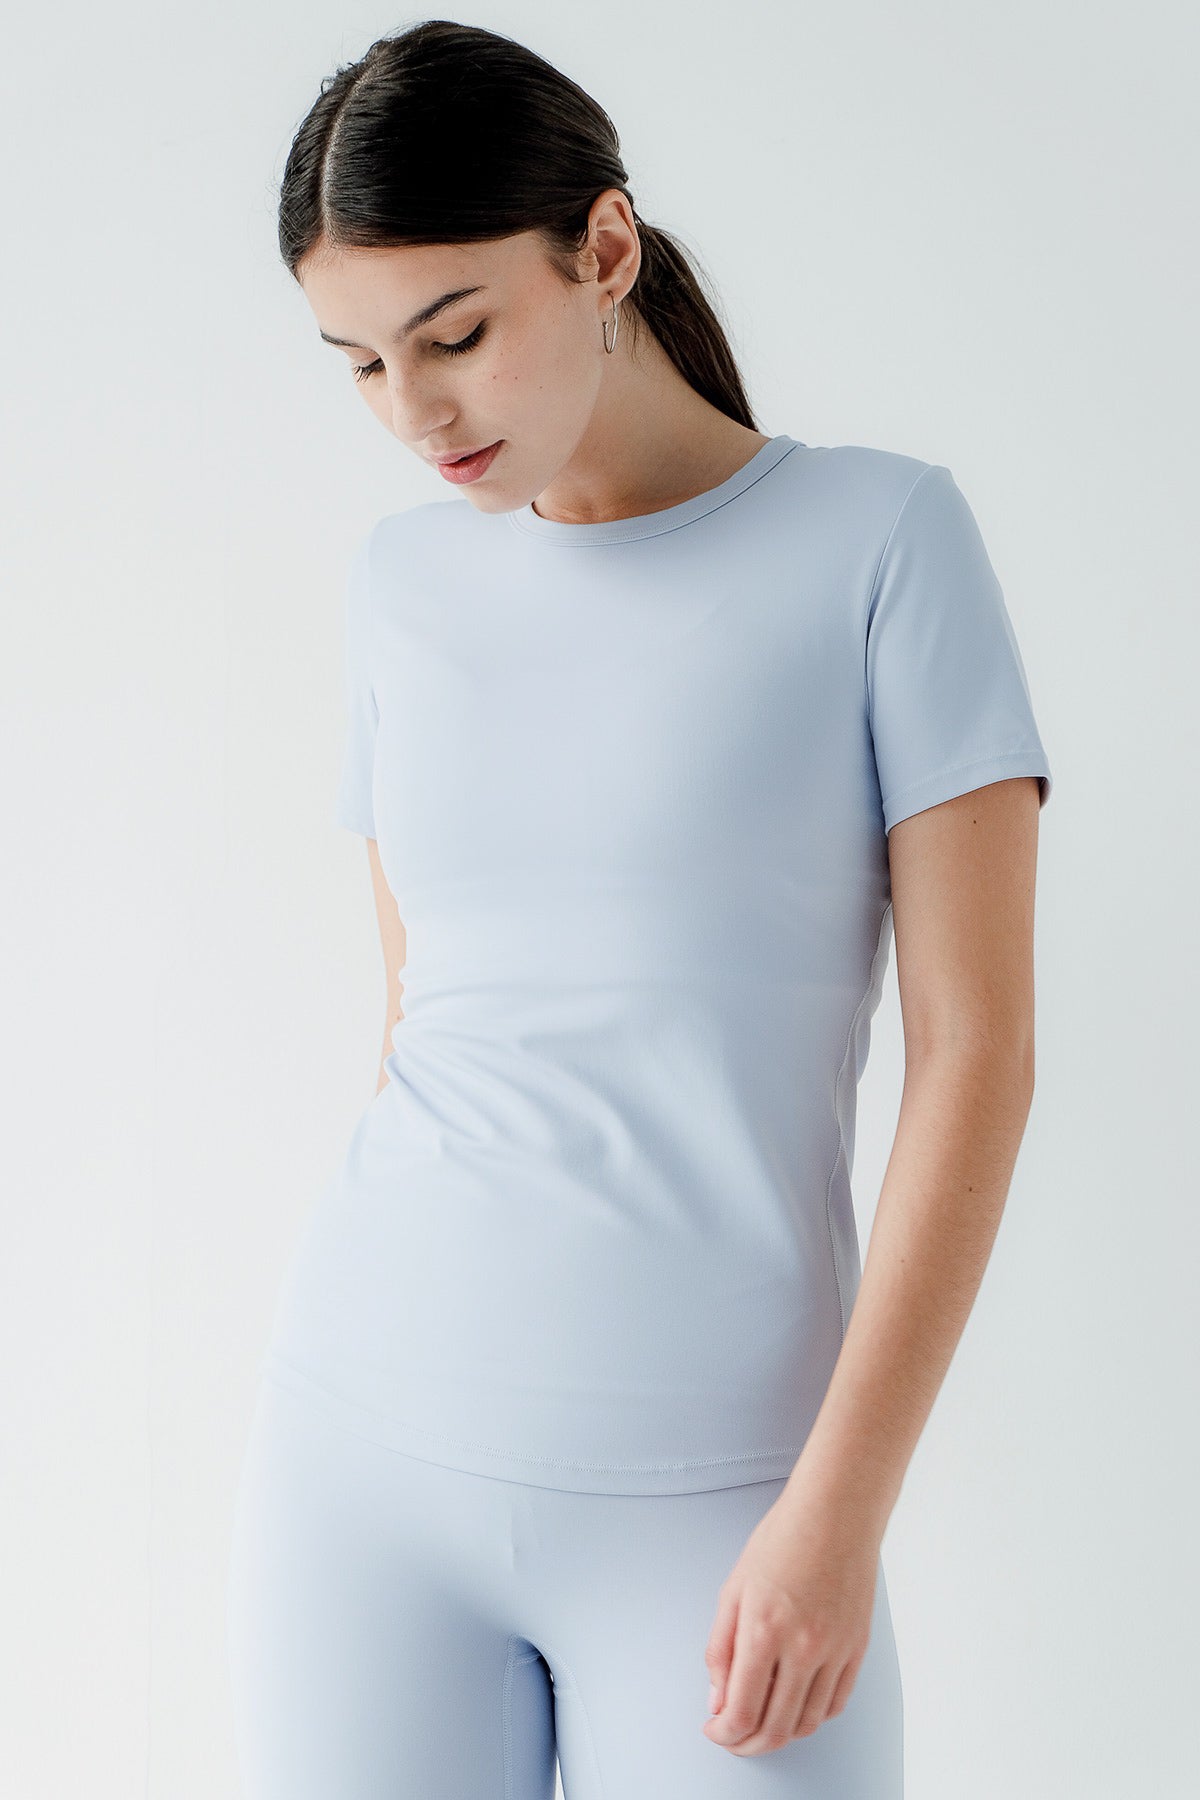 Staple T-shirt In Icy Blue